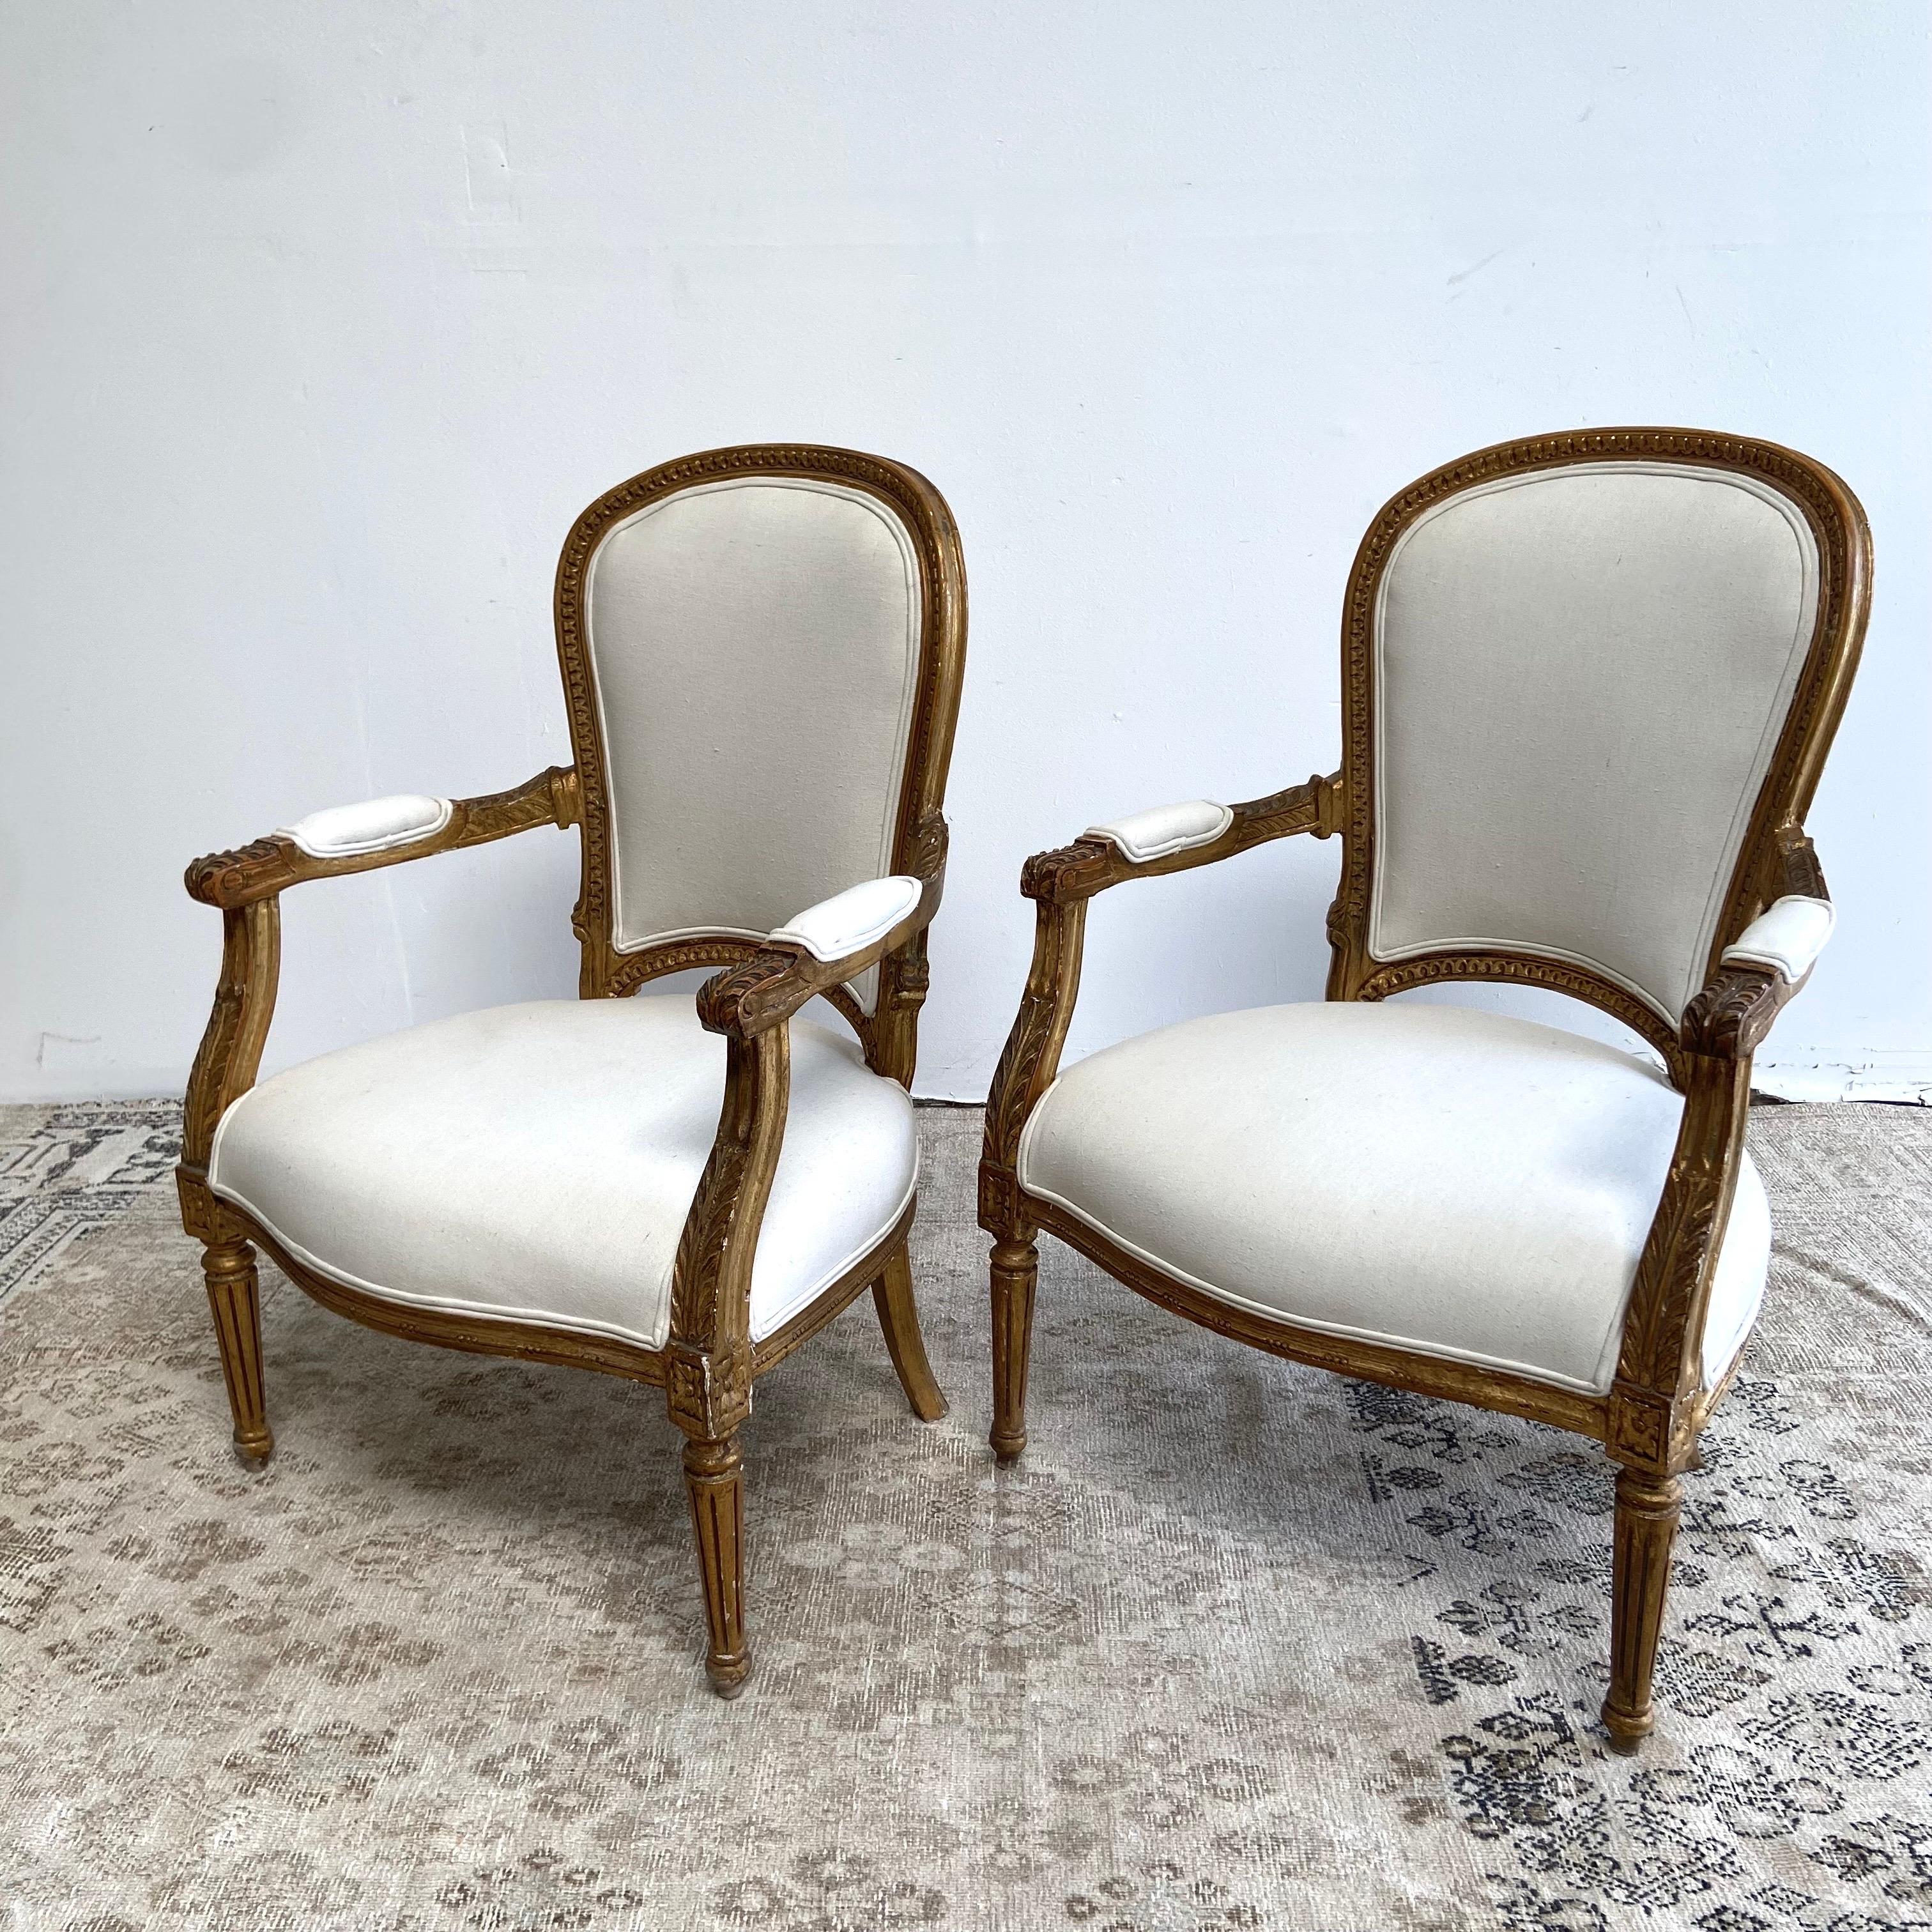 Vintage French Style Louis XVI Open Arm Chairs with Linen Upholstery For Sale 3